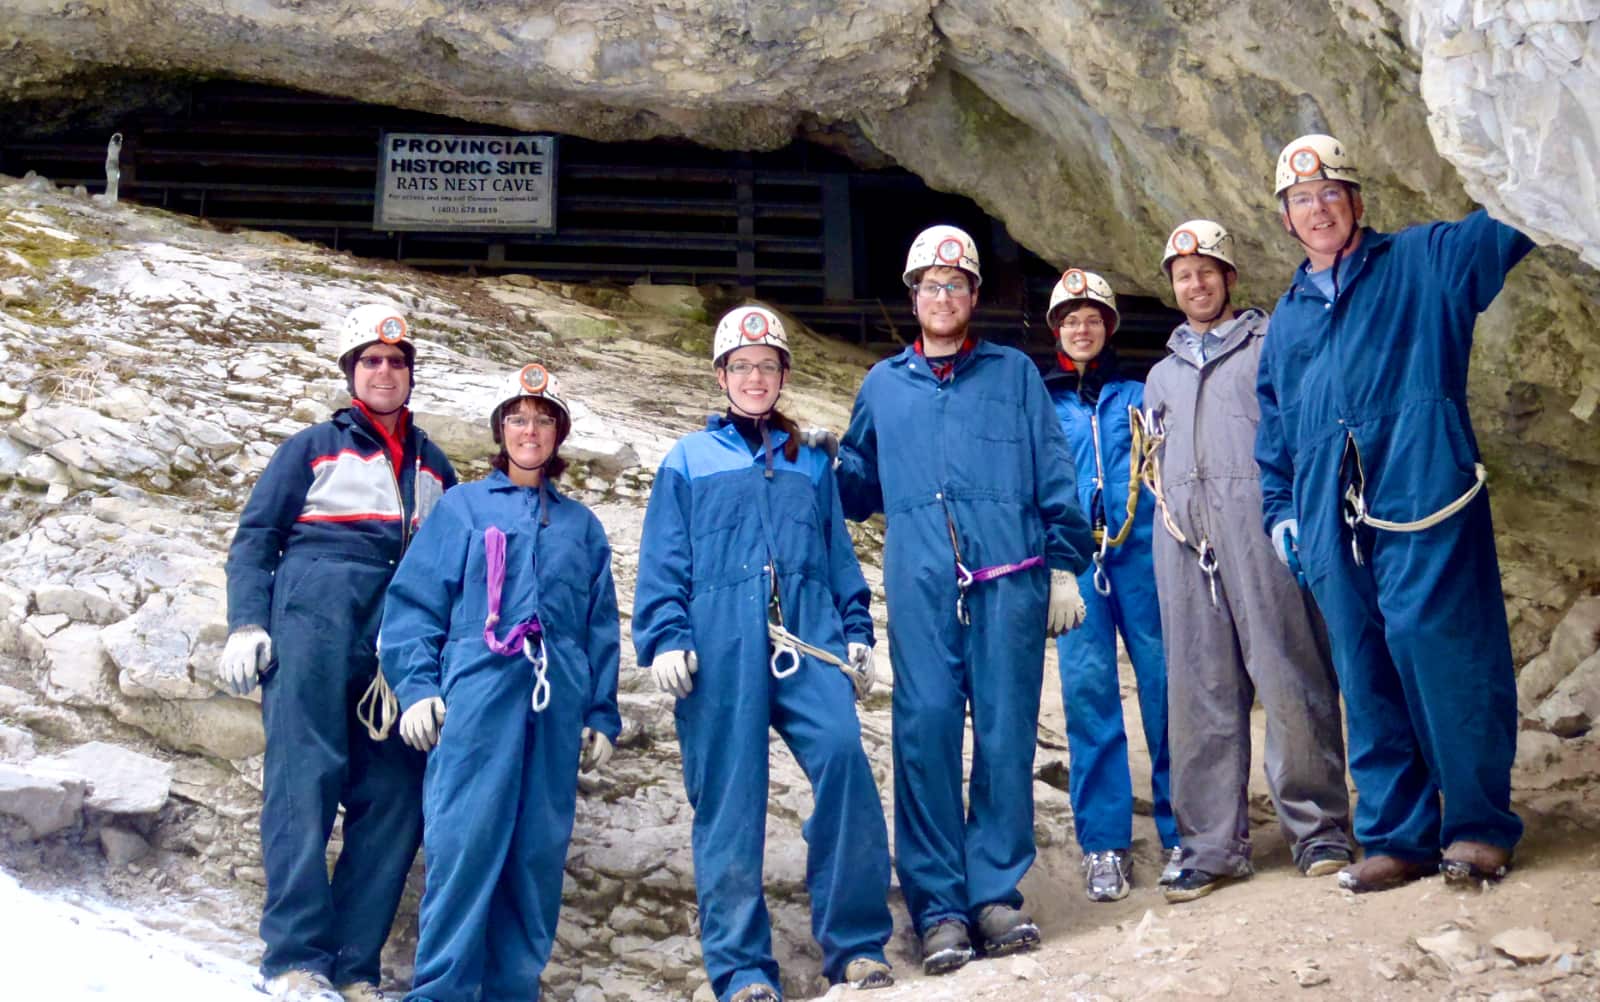 Group of people in blue coveralls in foreground with Rats Nest cave entrance in background